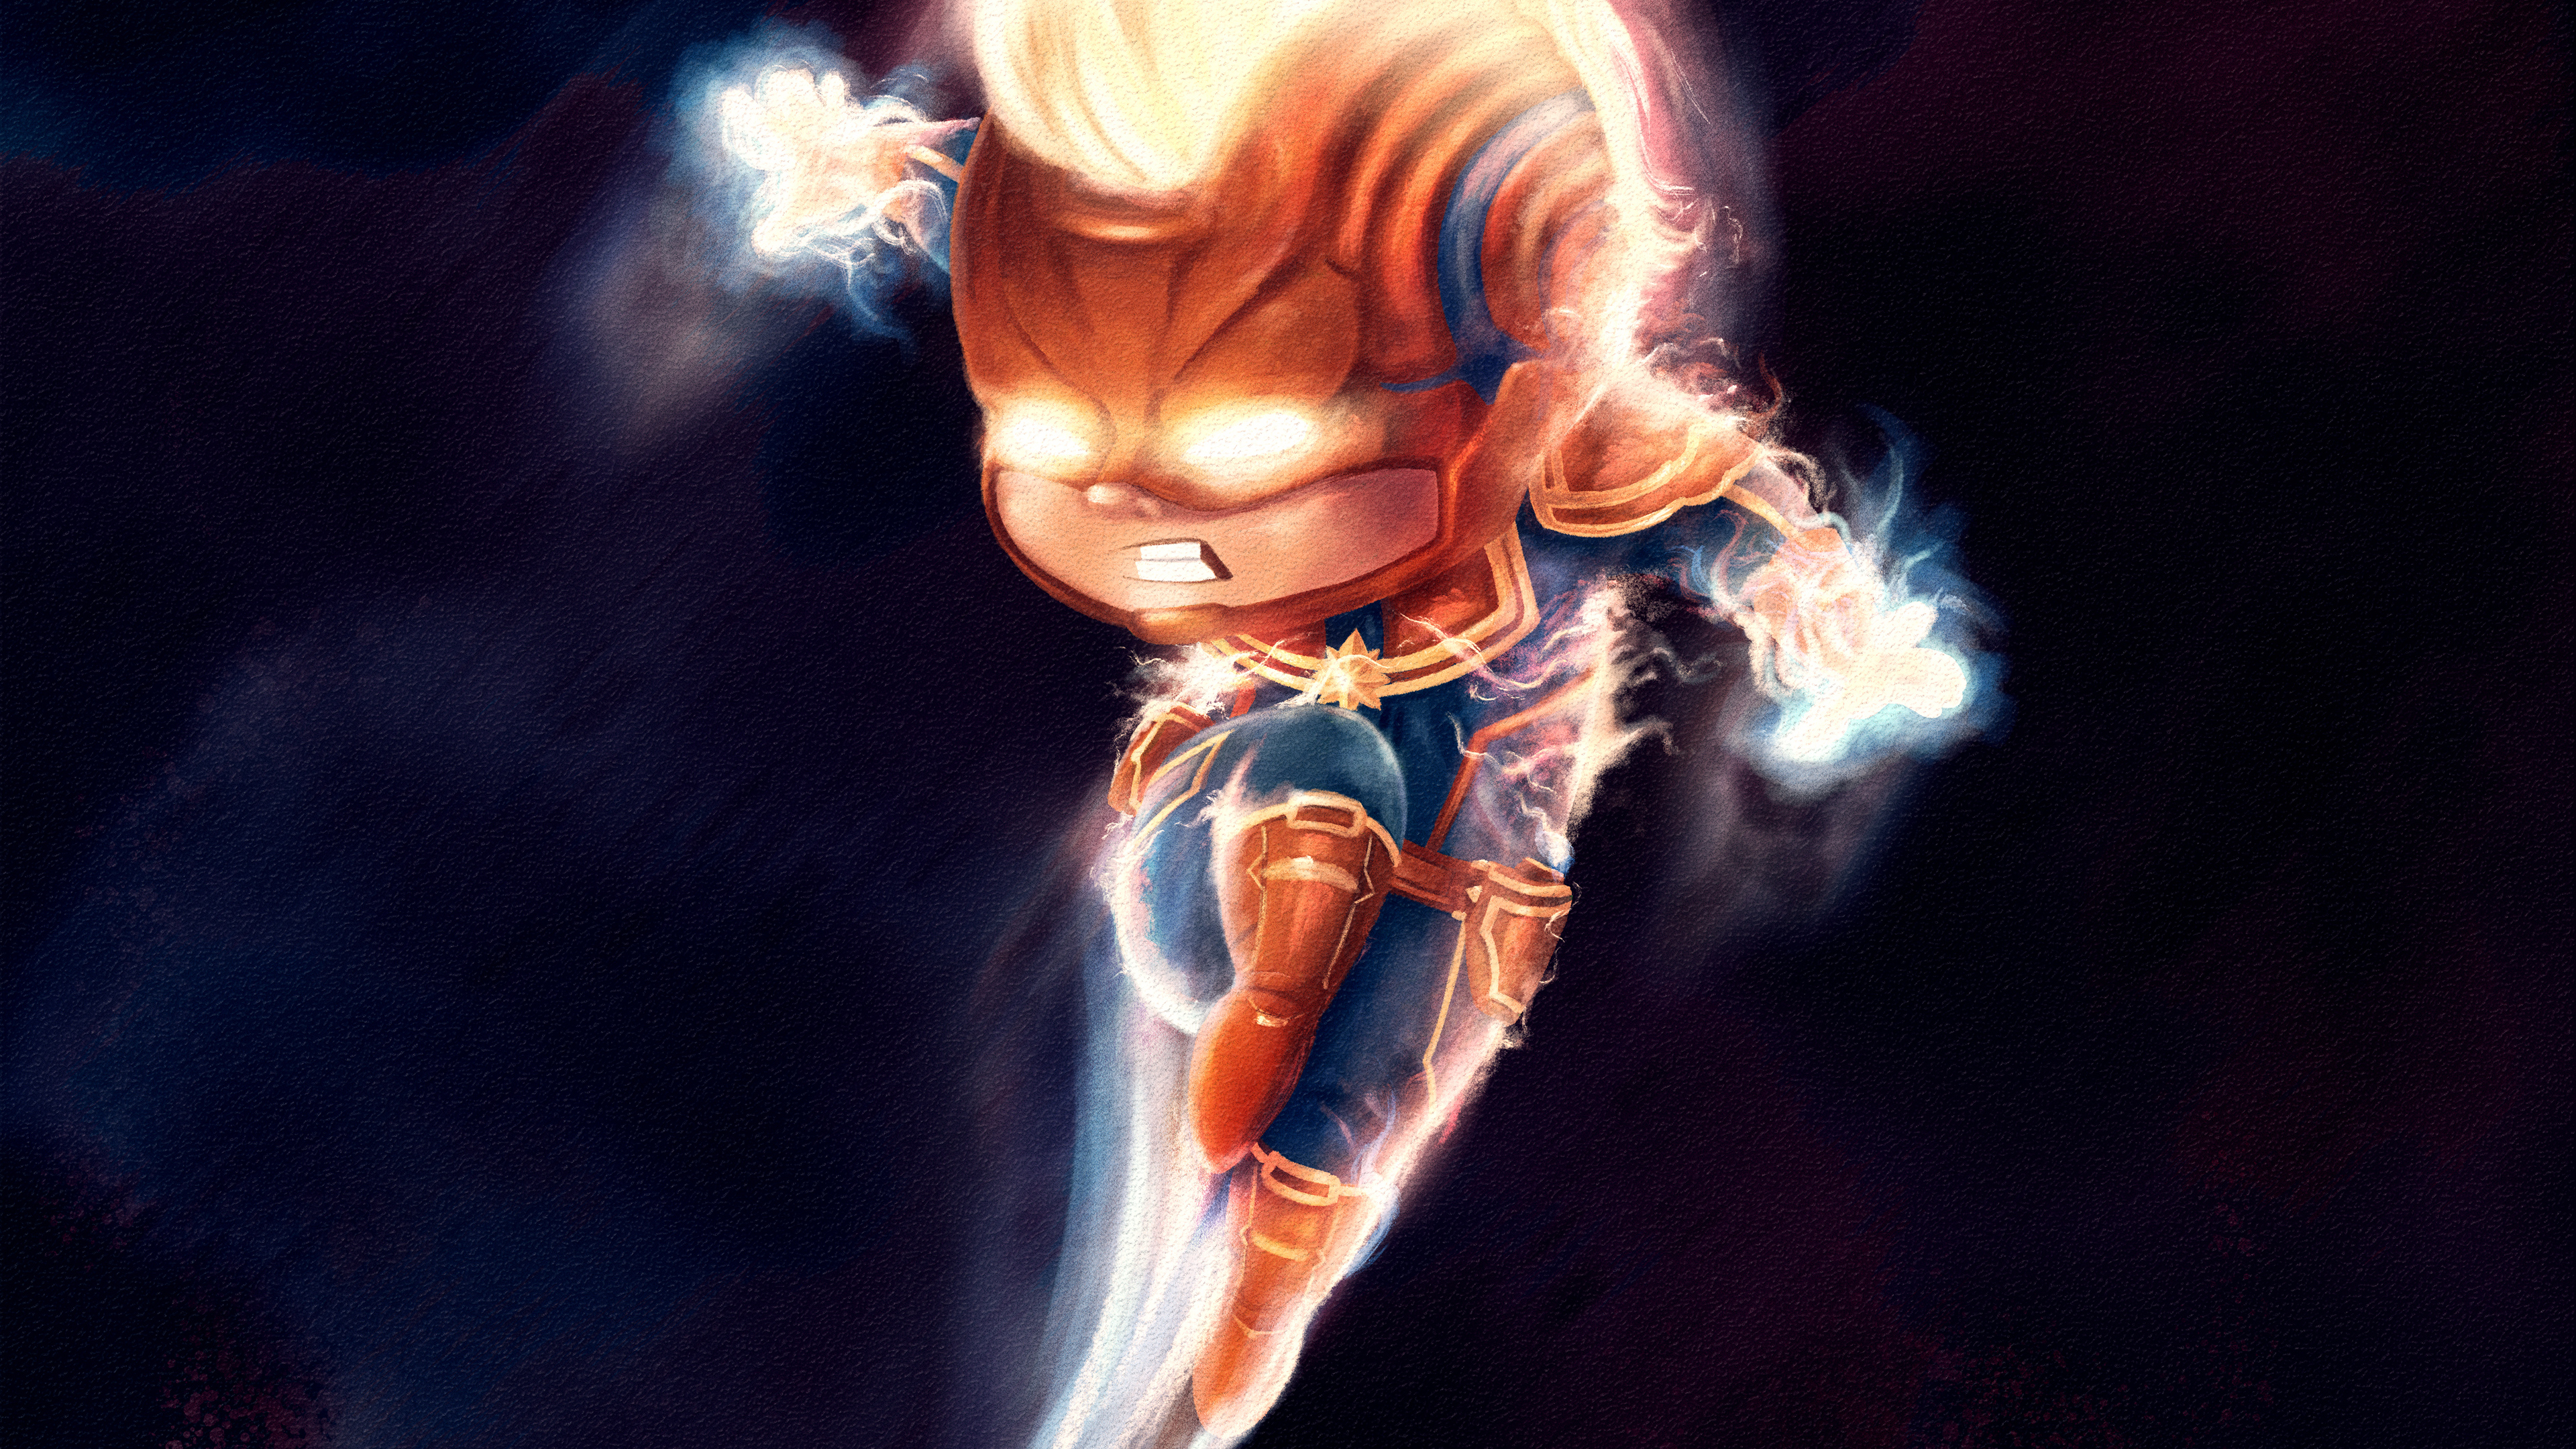 Chibi Captain Marvel 4k Artwork, HD Superheroes, 4k Wallpapers, Images,  Backgrounds, Photos and Pictures